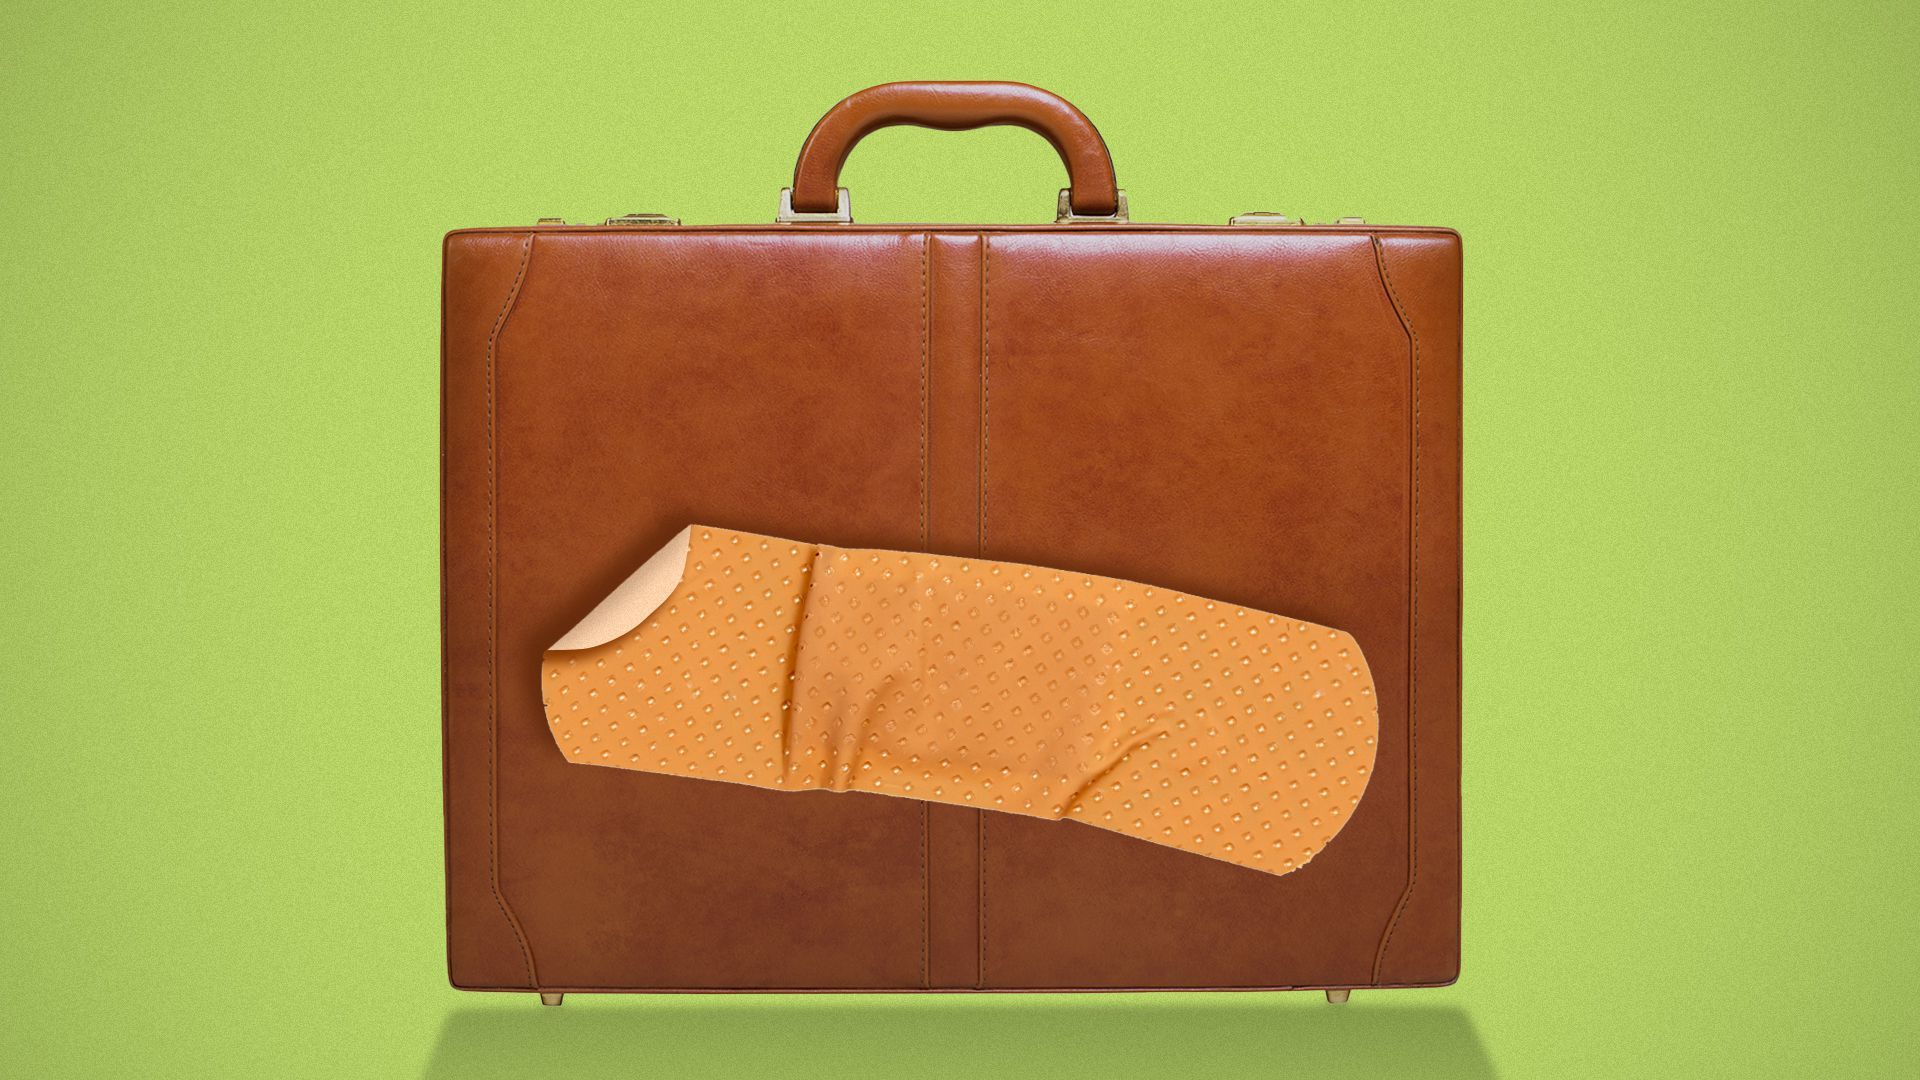 Illustration of a bandage falling off a briefcase.